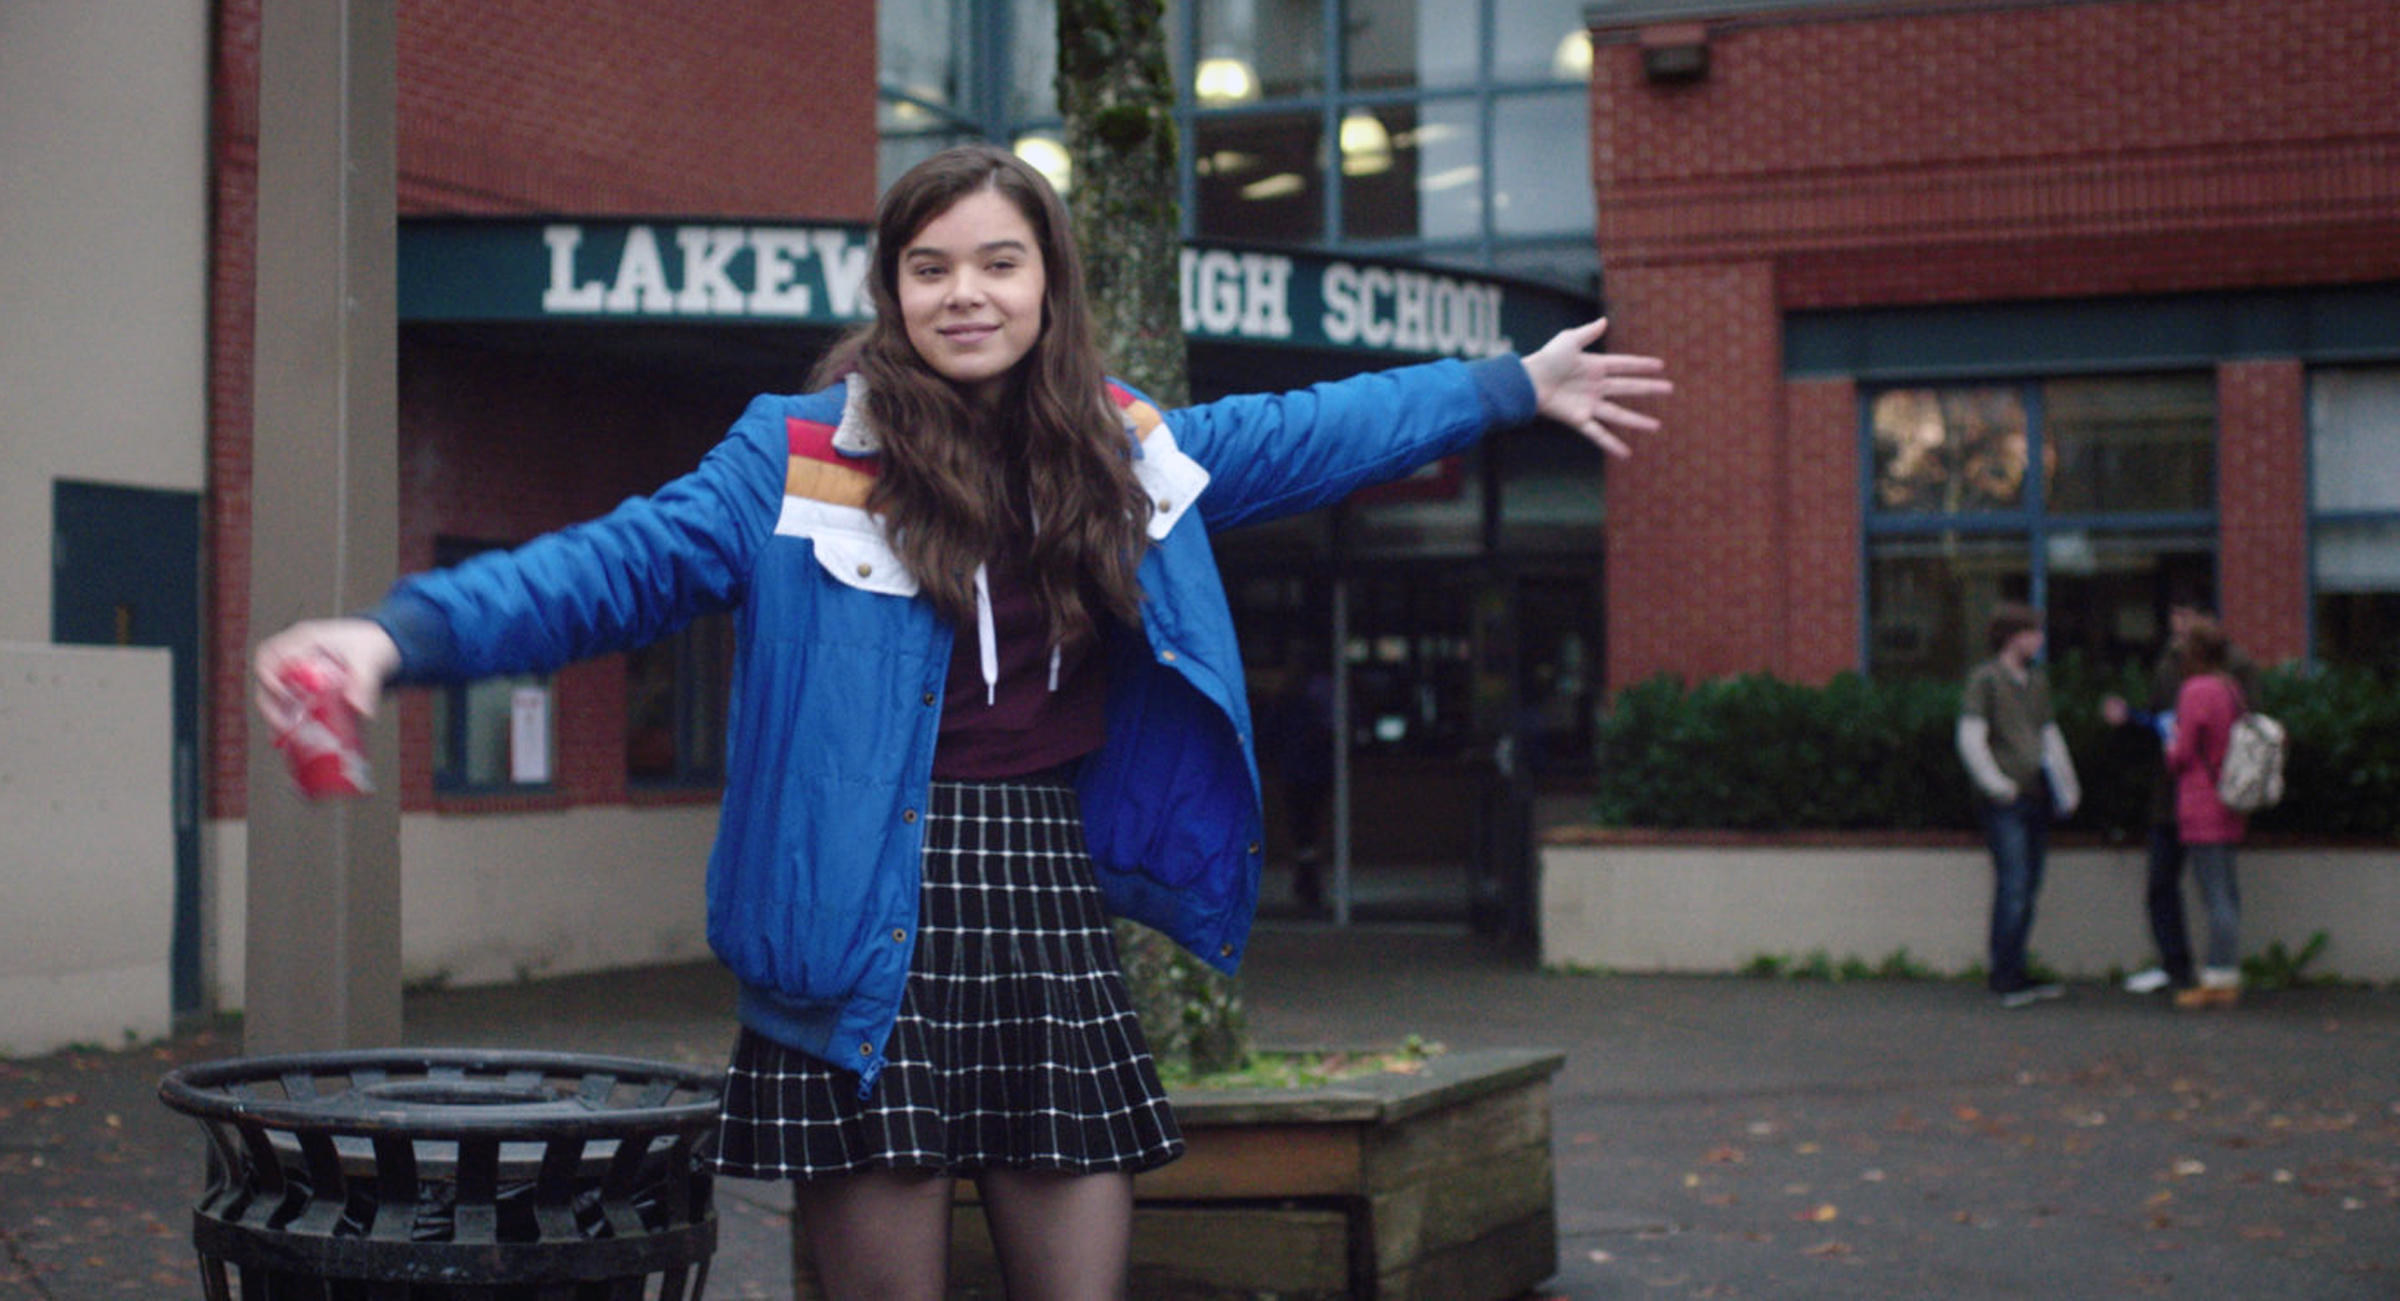 A teenage girl poses in front of her high school